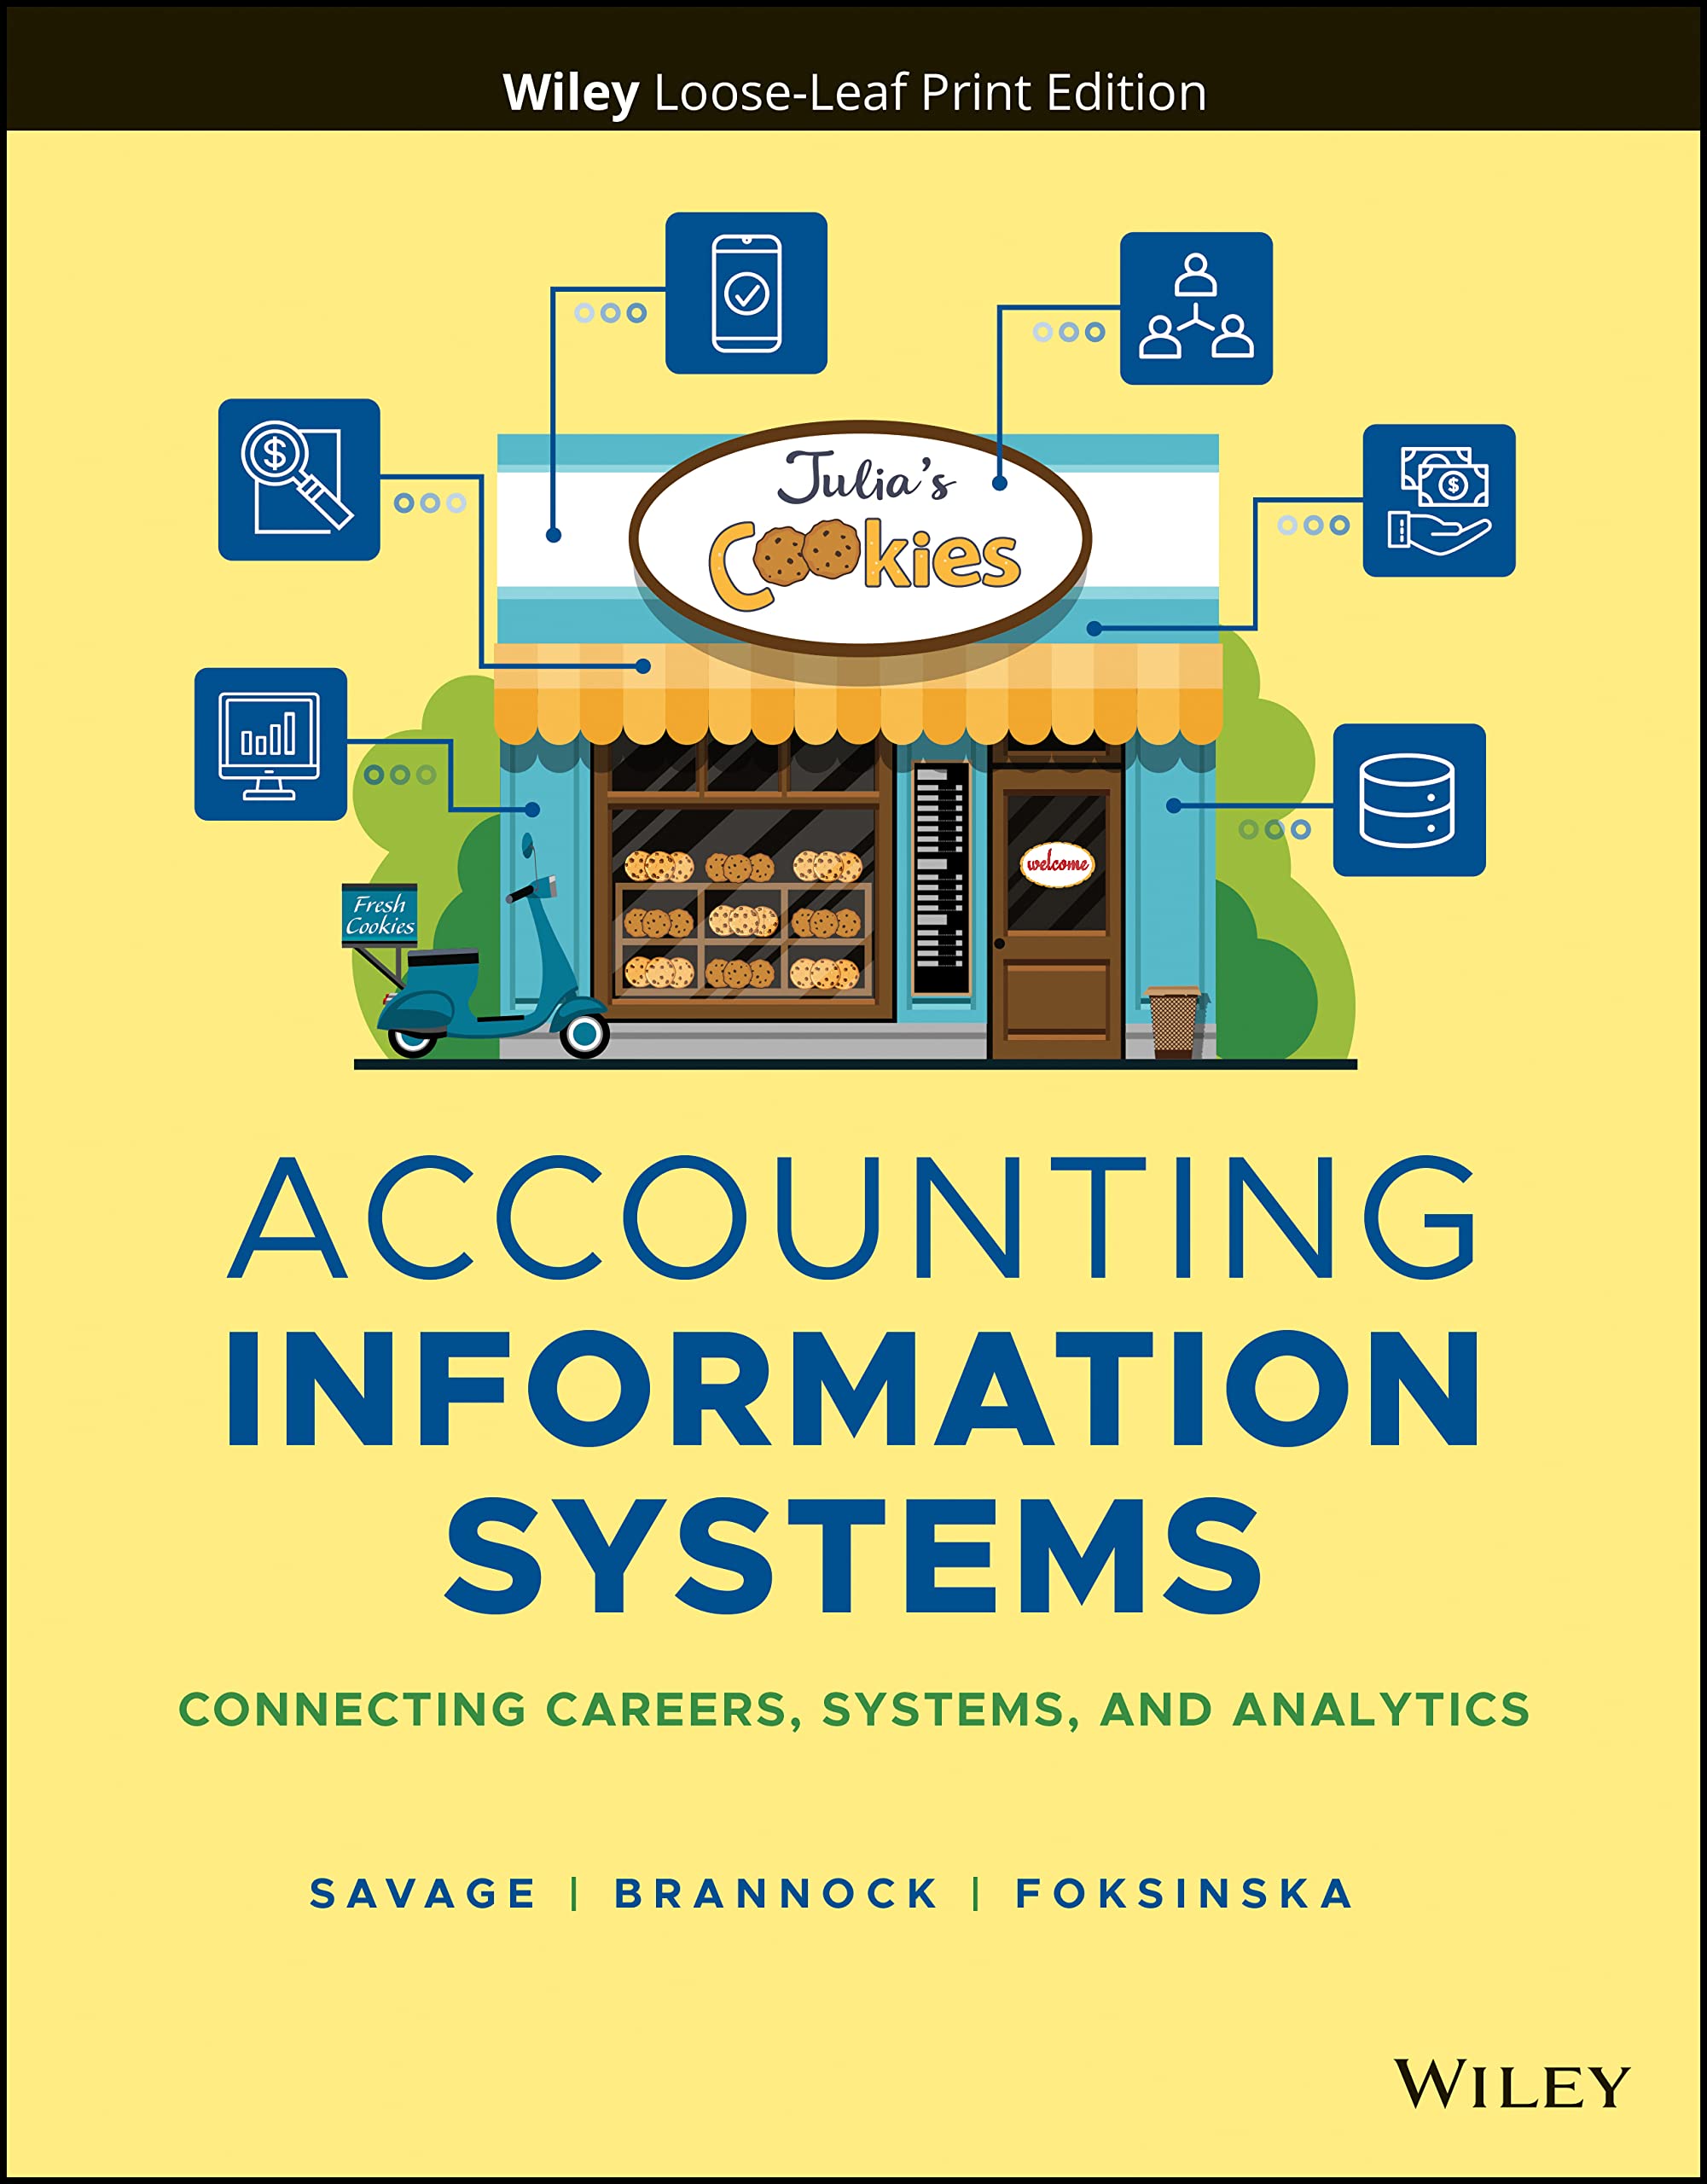 Accounting Information Systems: Connecting Careers, Systems, and Analytics